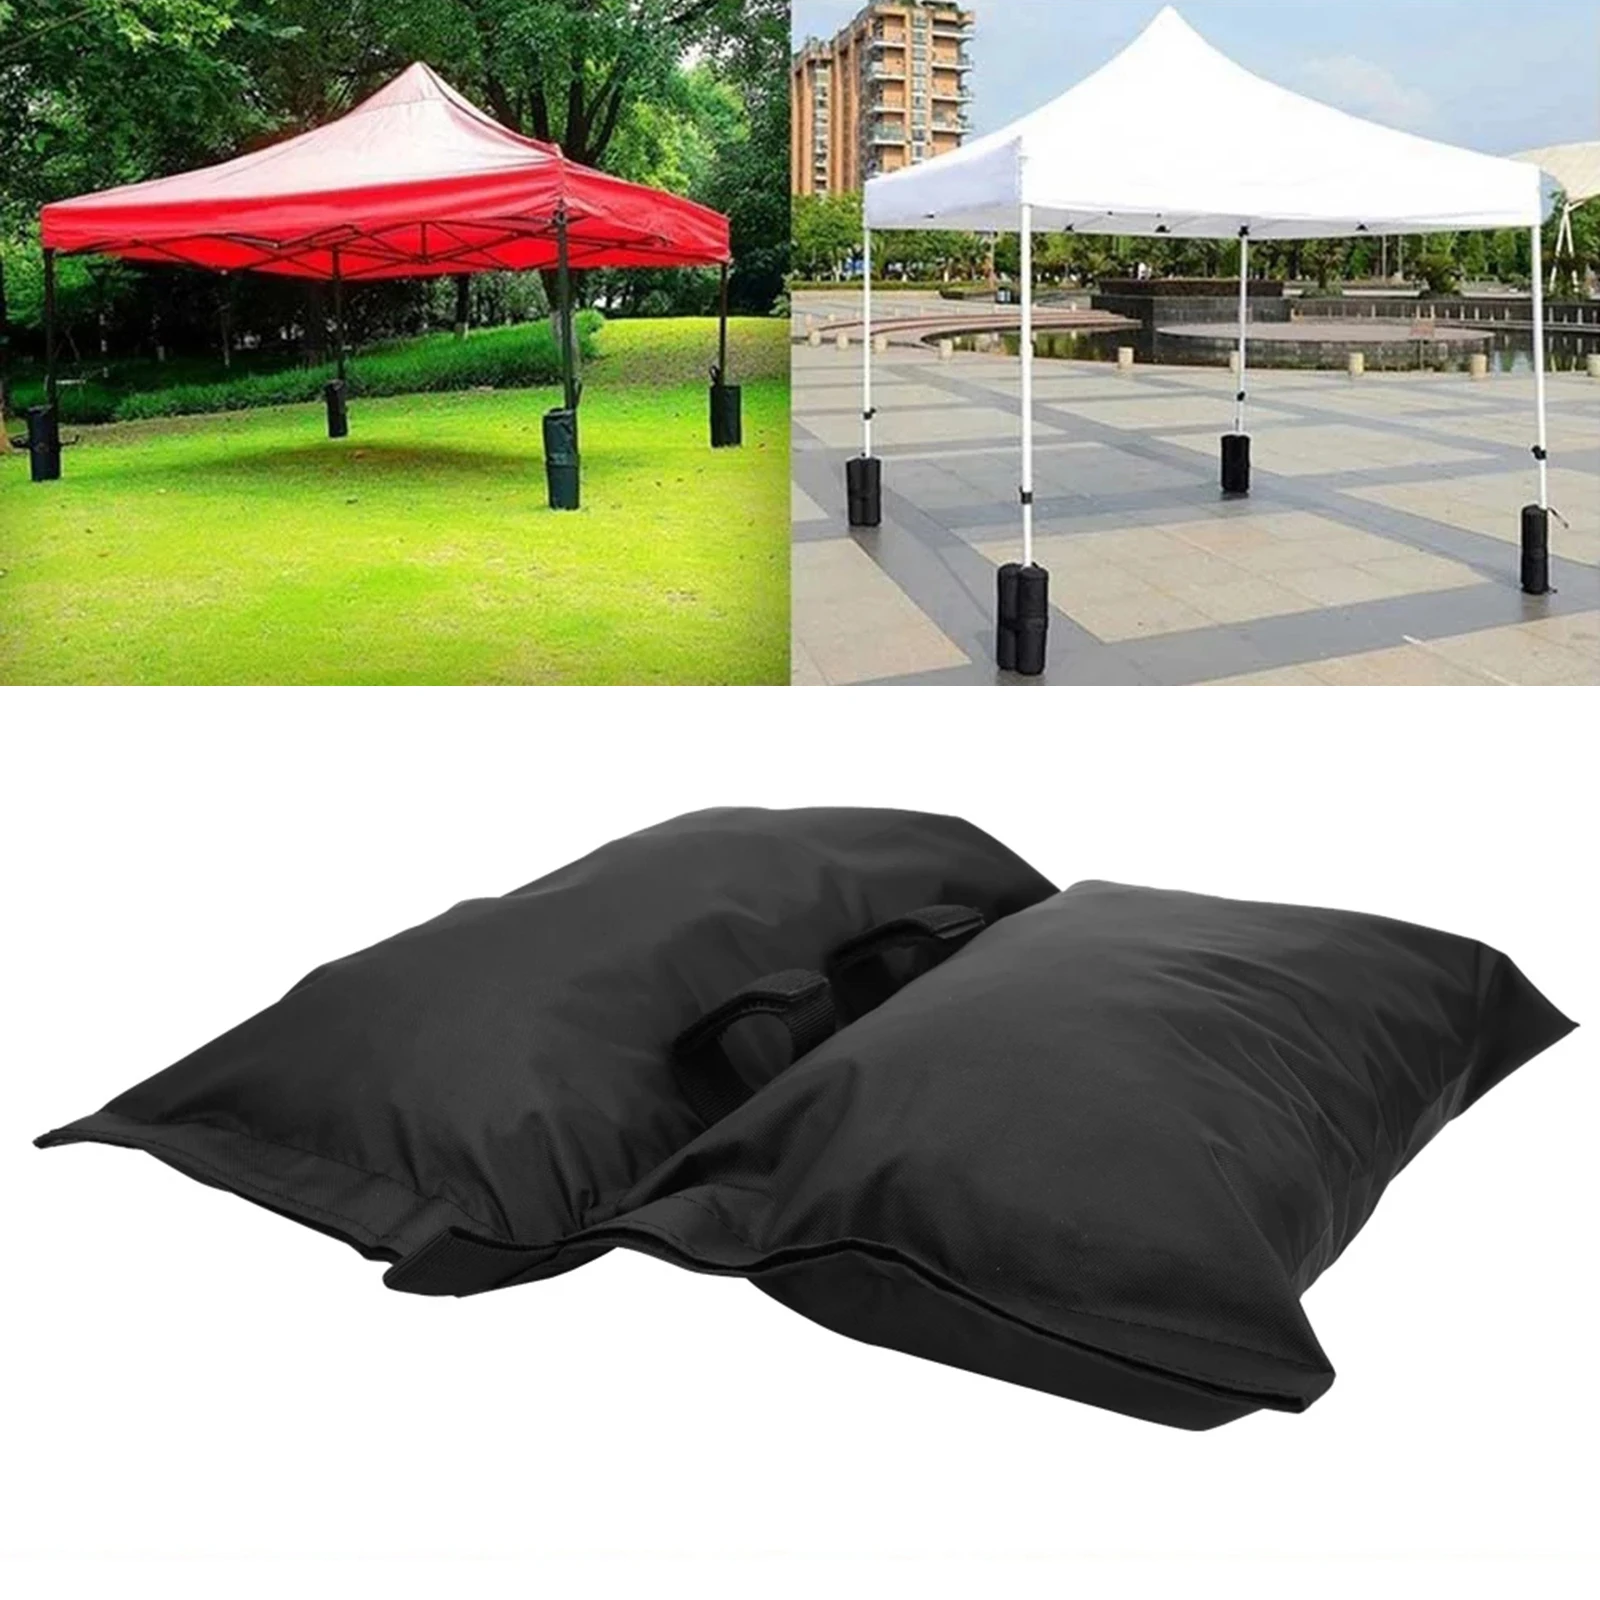 Parasol Bases, Portable Parasol Umbrella Stand Base Weight Bags Detachable Wind-Proof Fixing Sandbags for Outdoor and Beach